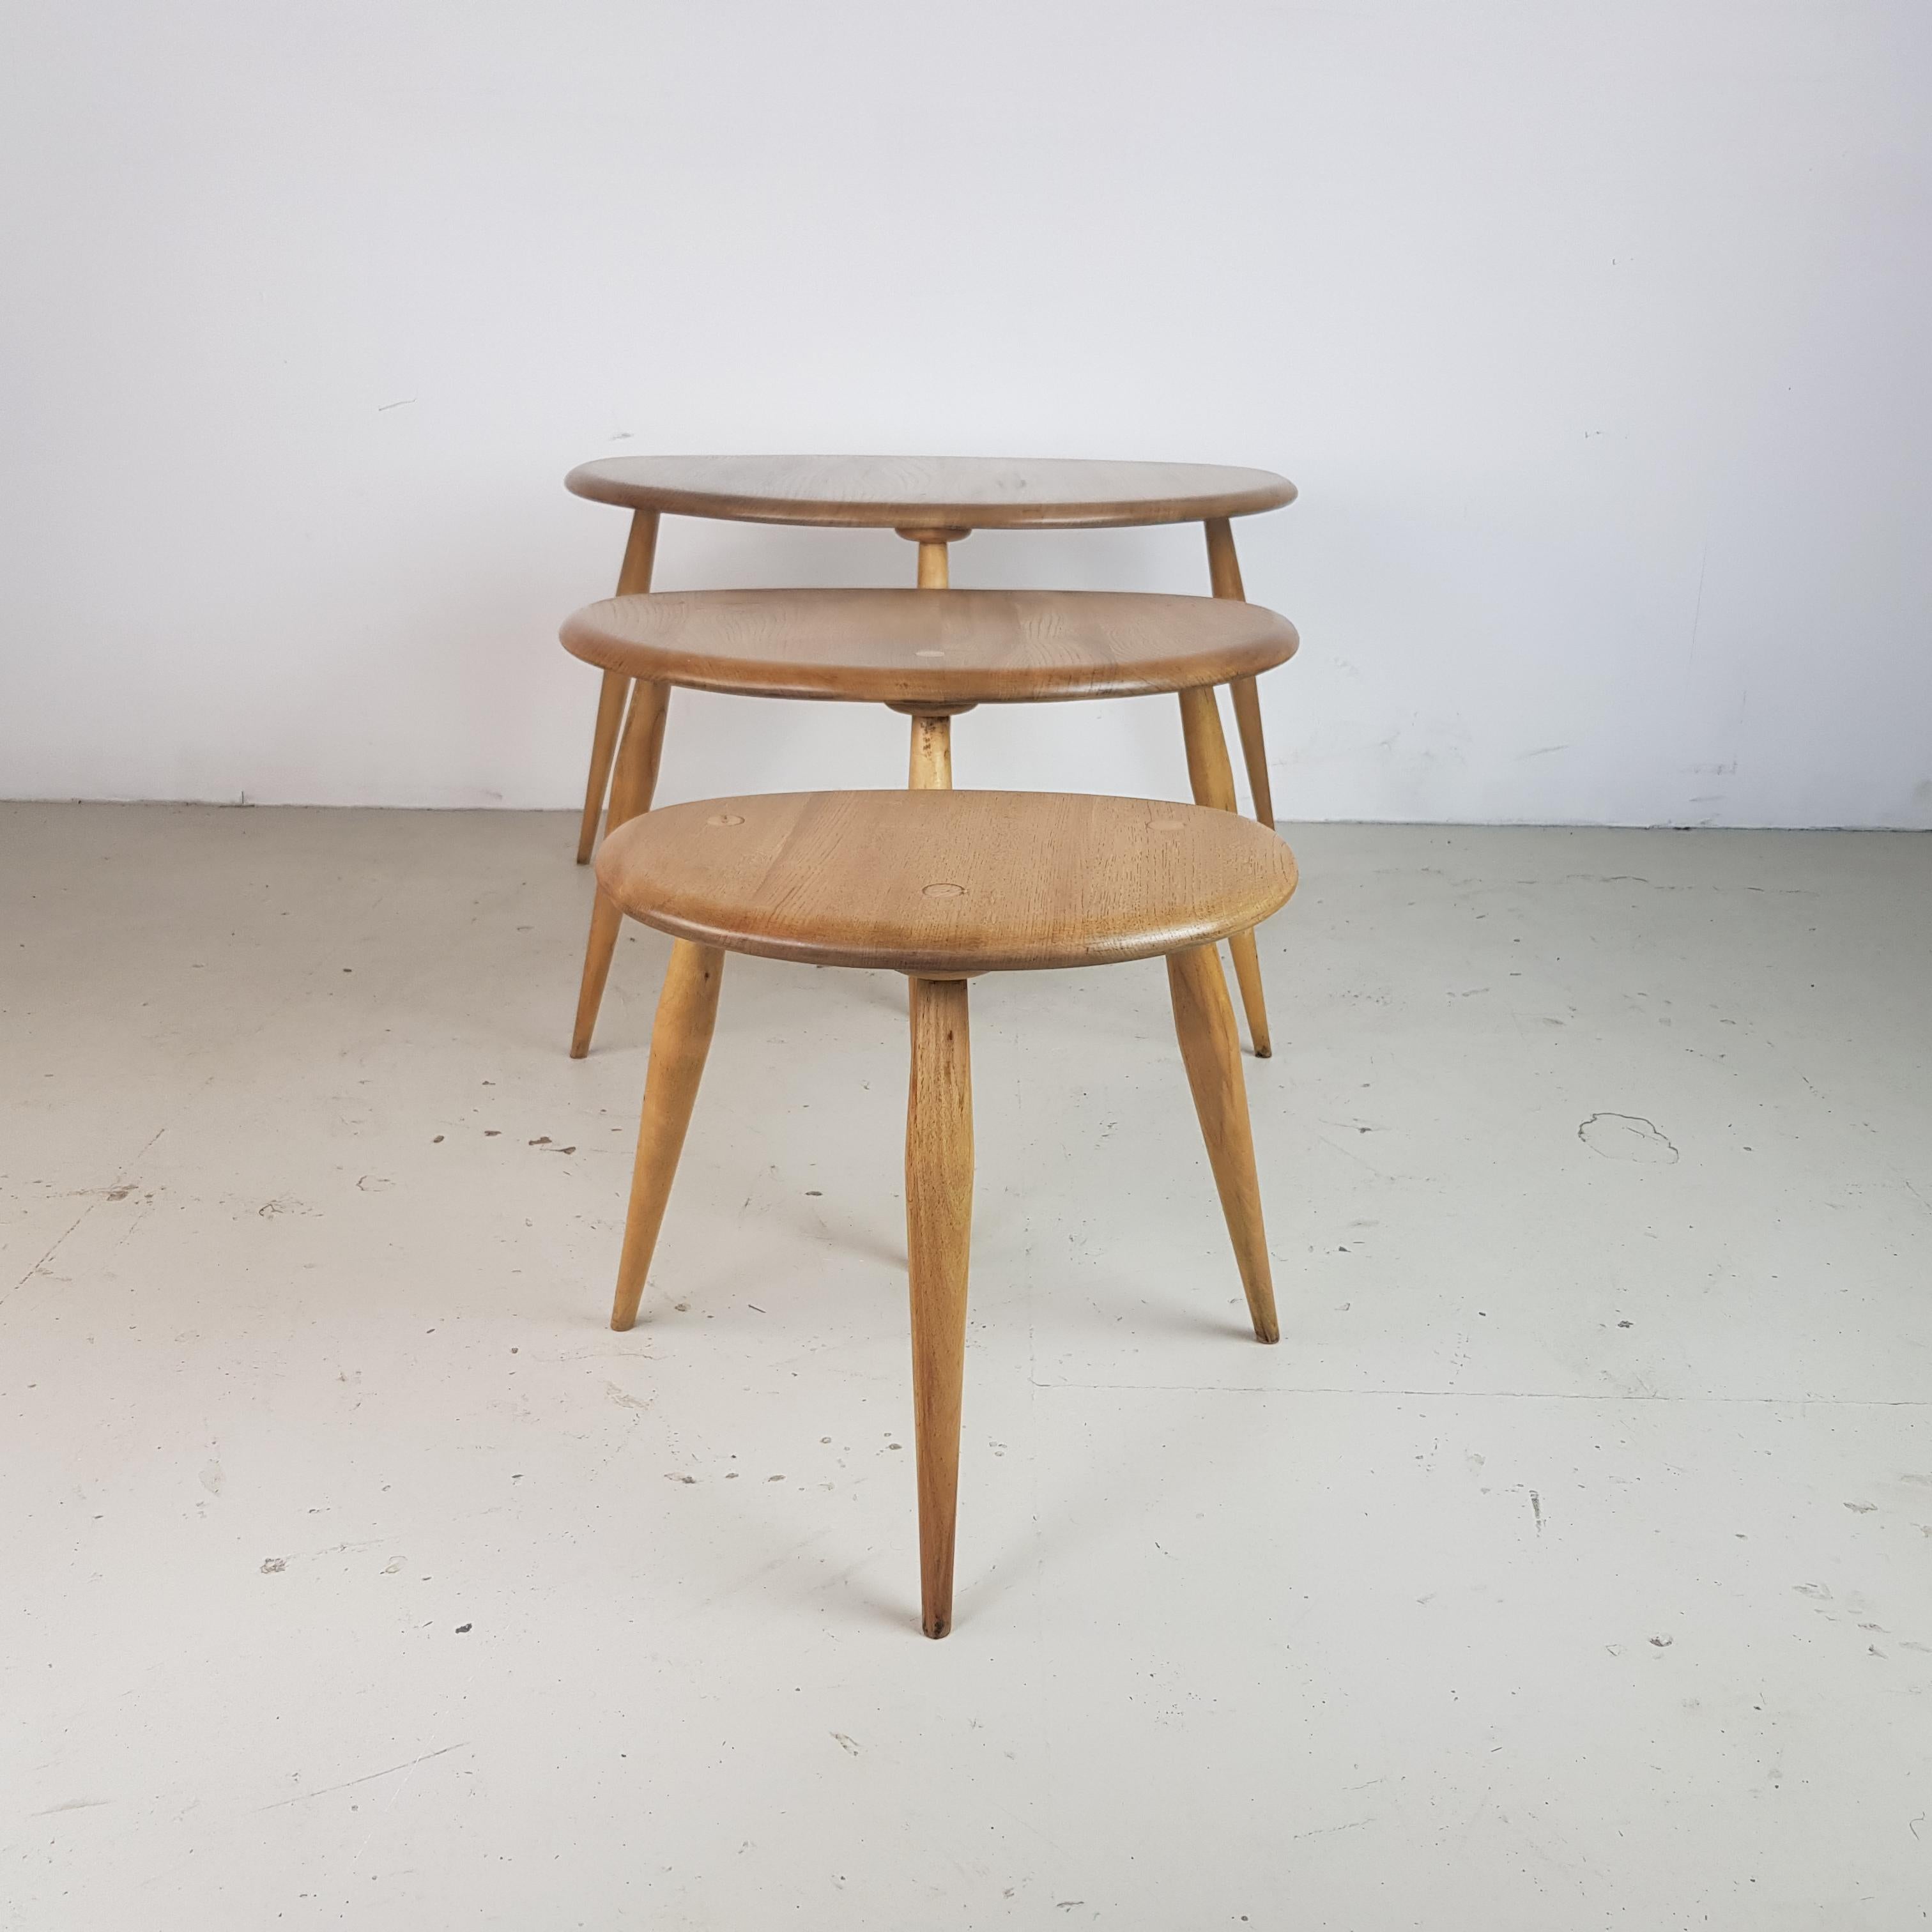 Designed by Lucian Ercolani 1956, these Ercol tables have a wonderful simplicity of design and appealing curves. Made with a beech top and splayed tapering legs. Lovely patina to the wood.

In good vintage condition, with some wear commensurate